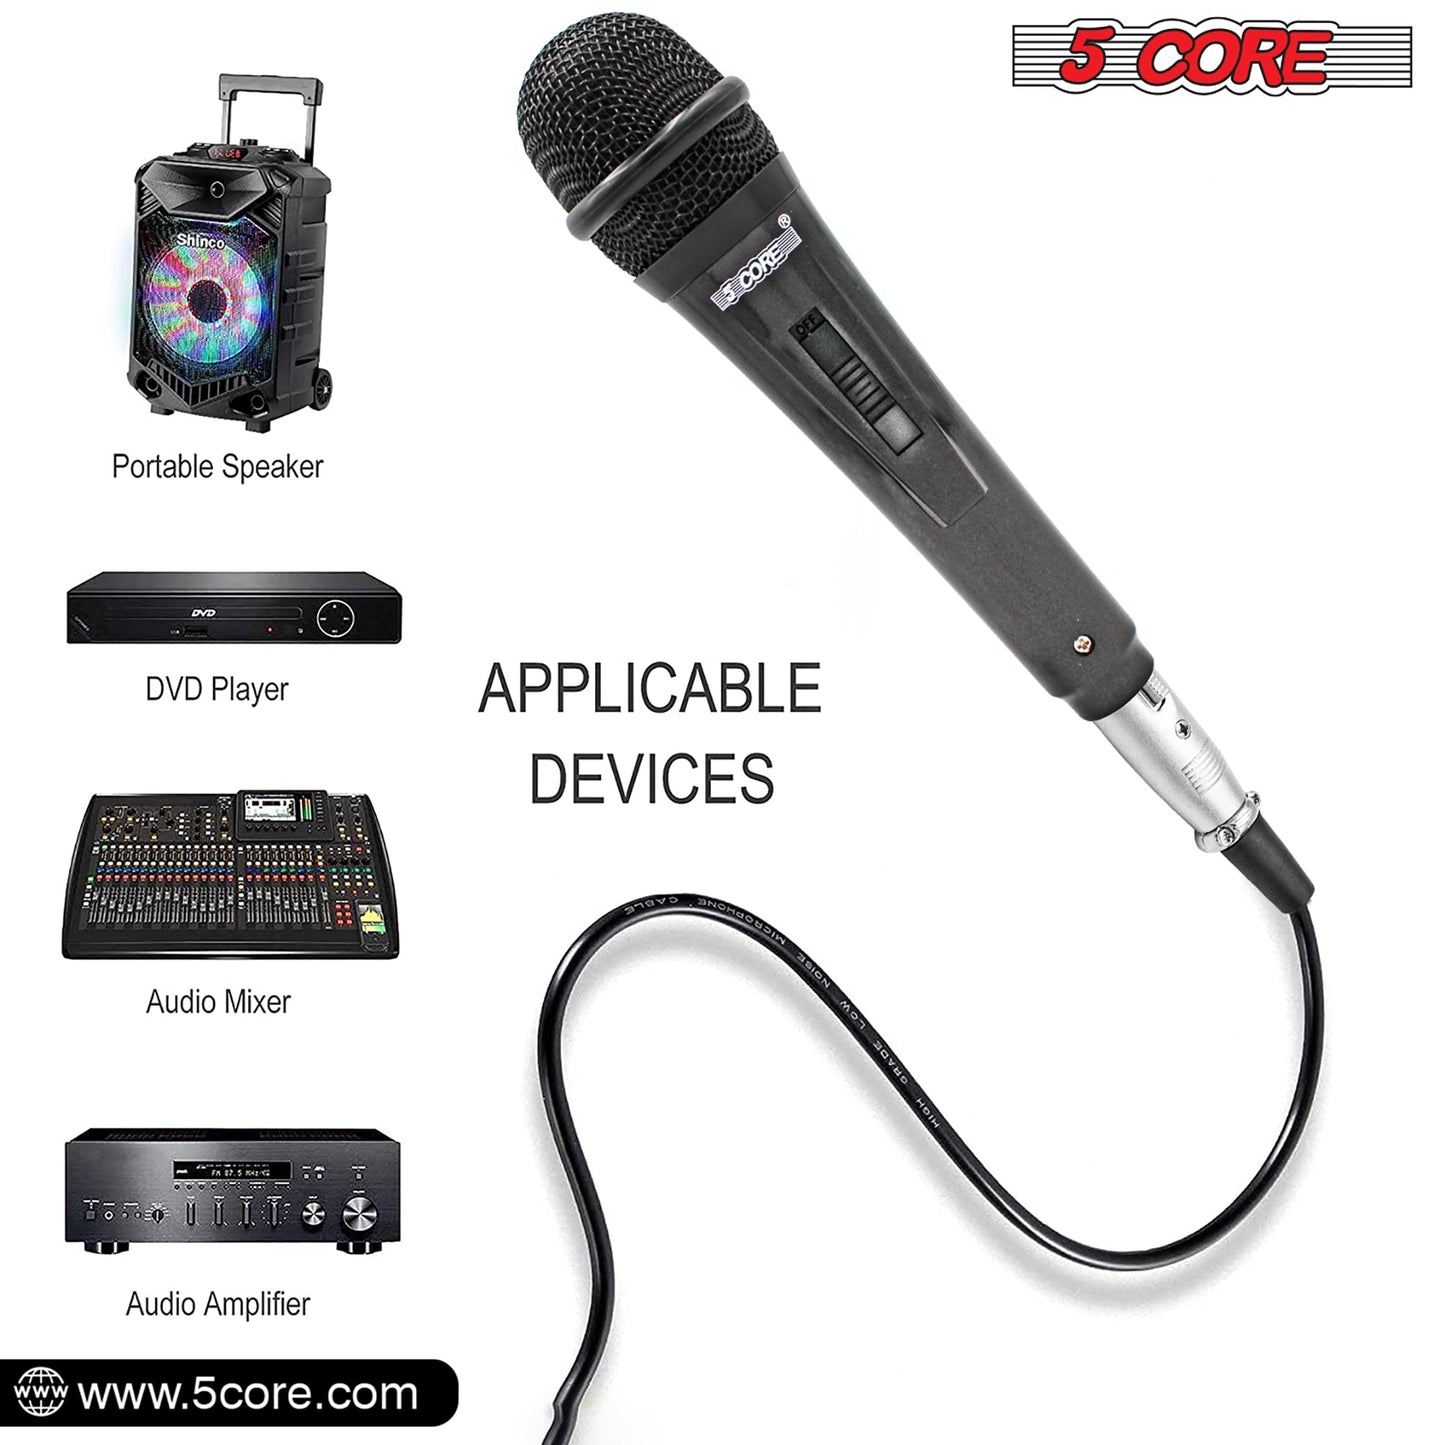 5 Core Microphone 1 Piece Professional Black Dynamic Karaoke XLR Wired Mic w ON/OFF Switch Integrated Pop Filter Cardioid Unidirectional Pickup Handheld Micrófono for Singing DJ Podcast Speeches Includes Cable Mic Holder - PM 816-9